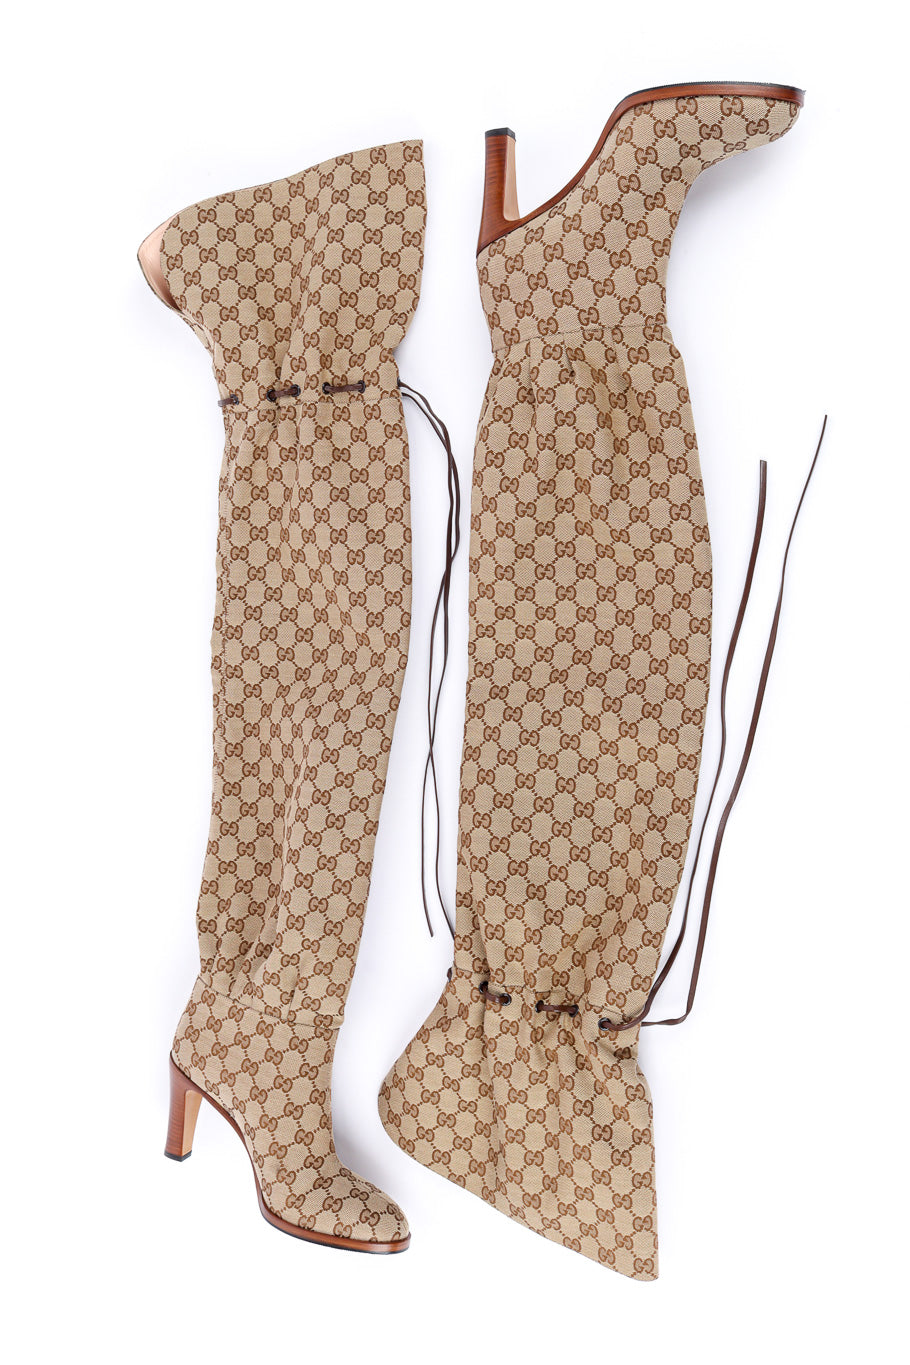 GG Monogram Over-the-Knee-Boots by Gucci flat lay on white background @recessla